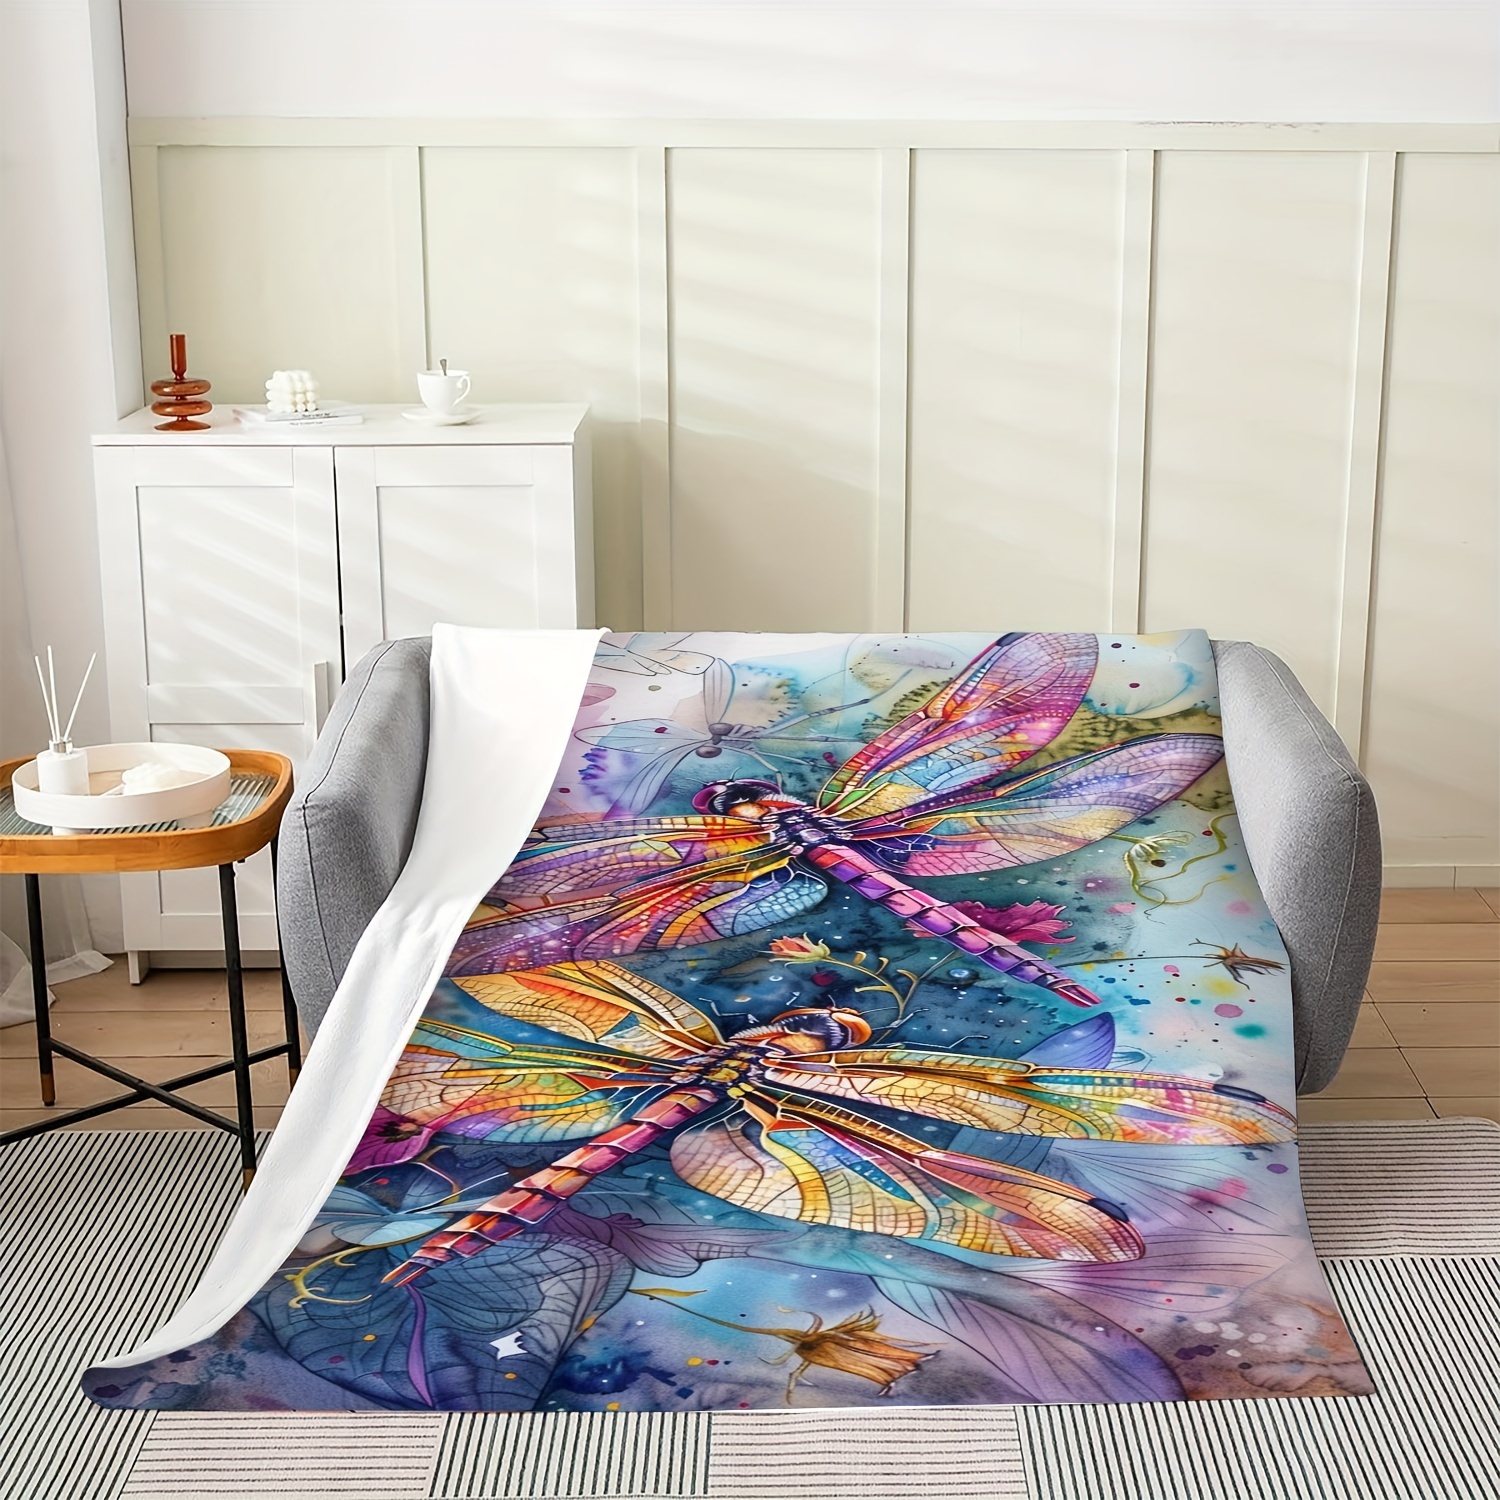 

Coastal Style Dragonfly Pattern Throw Blanket, Vibrant Animal Themed Soft Flannel Fleece, All Seasons Knitted Blanket With Unique Embellishment, 100% Polyester - Gift For Dragonfly Lovers